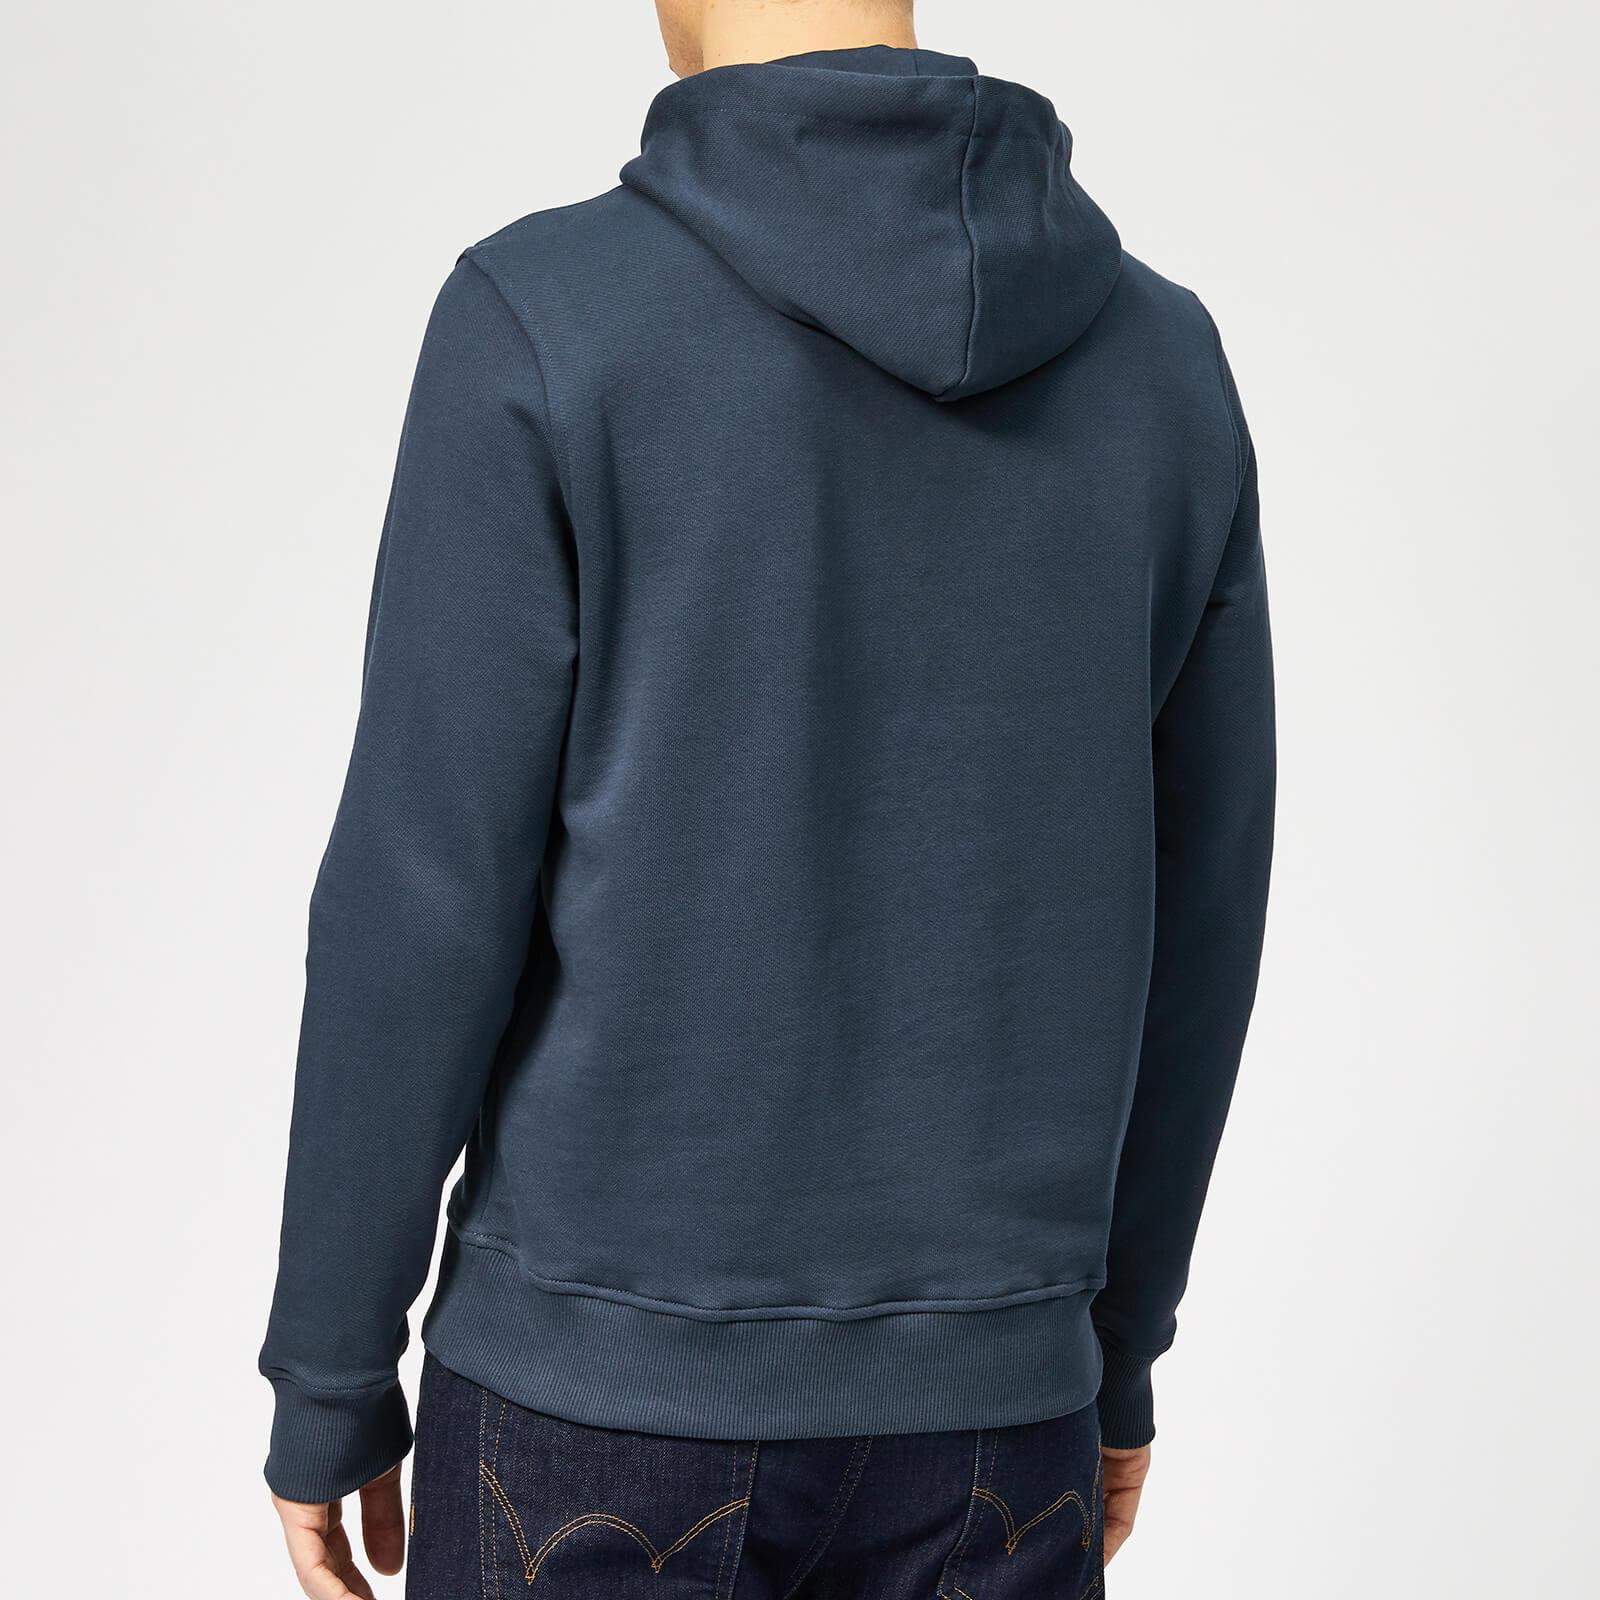 Woolrich Cotton Compact Hoodie in Navy (Blue) for Men - Lyst